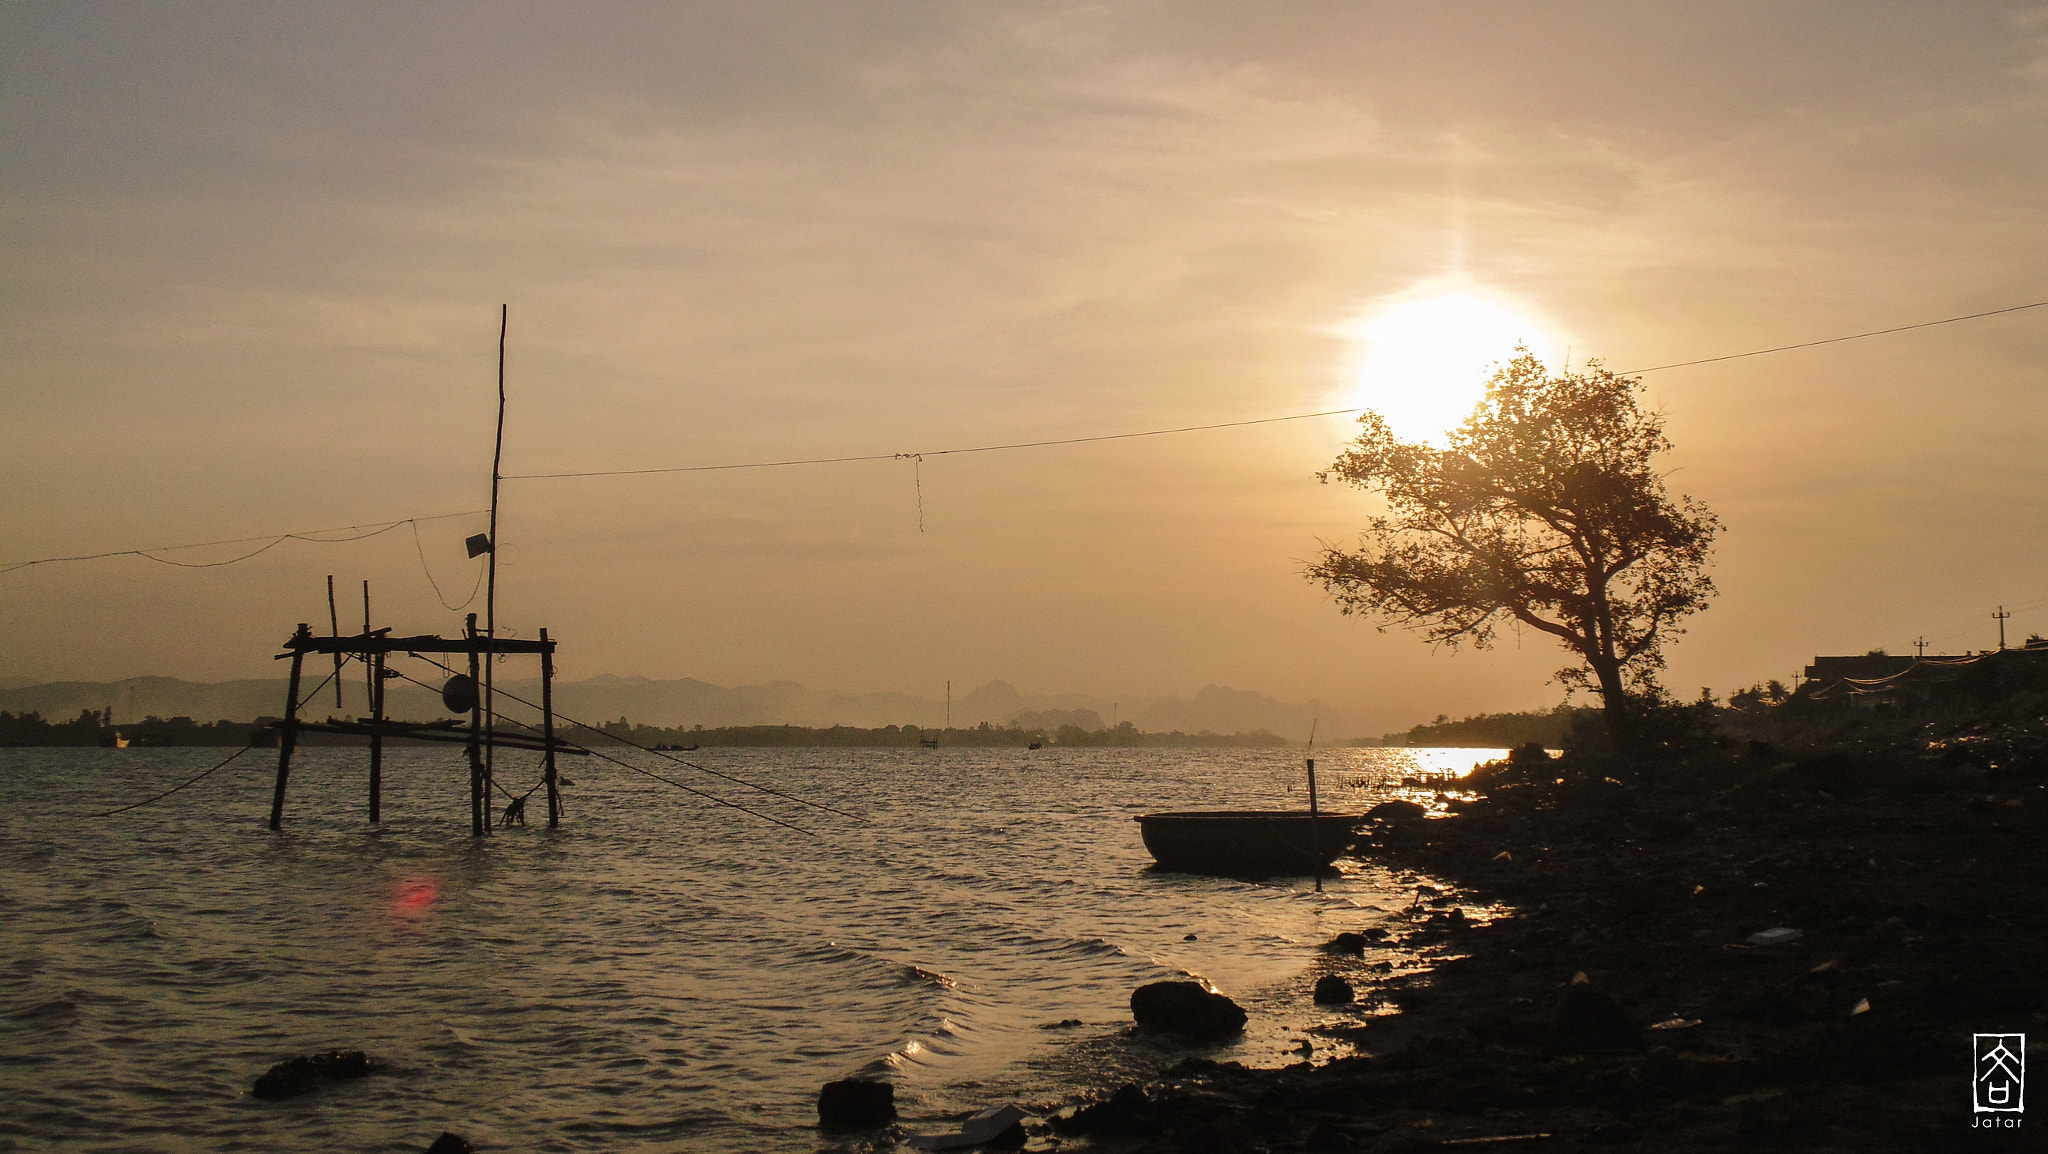 Sony Cyber-shot DSC-H200 sample photo. Giang river at sunset 04 photography